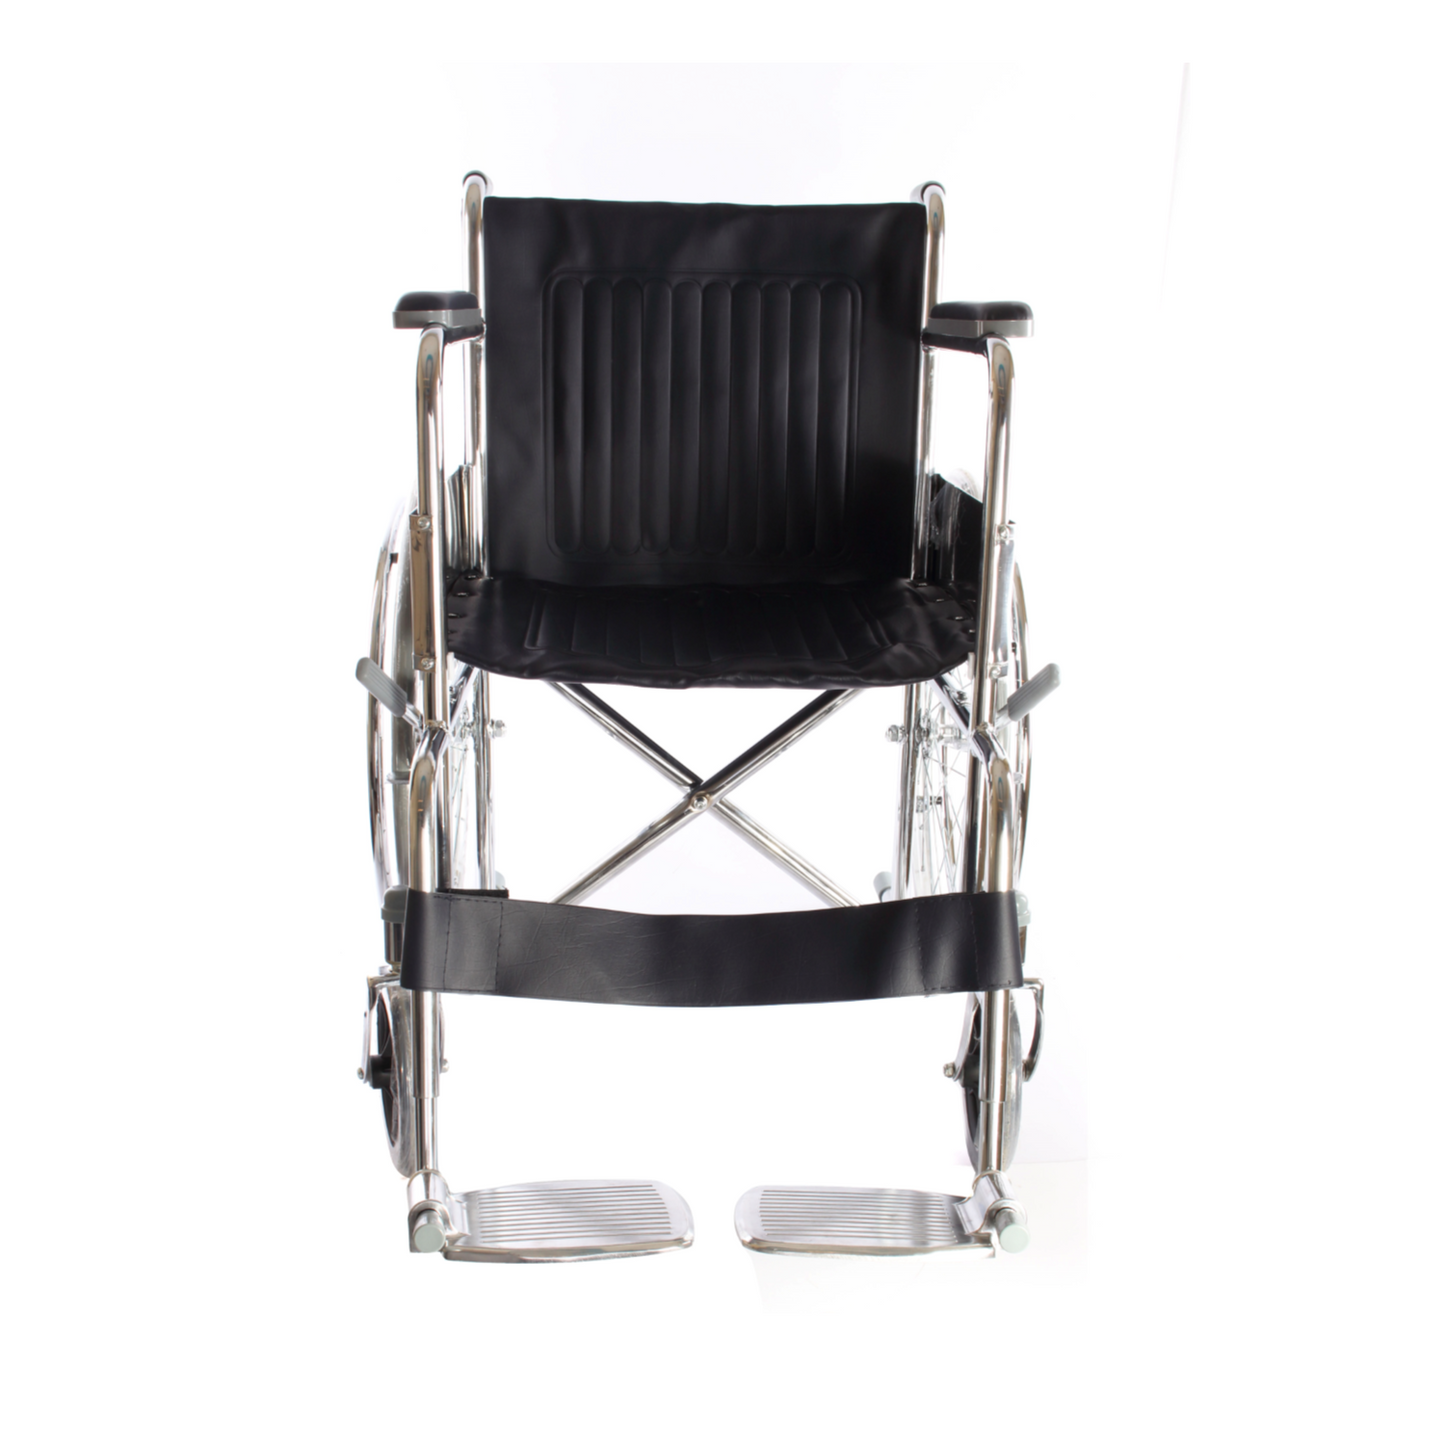 Persona Adult Wheelchair AMB 809